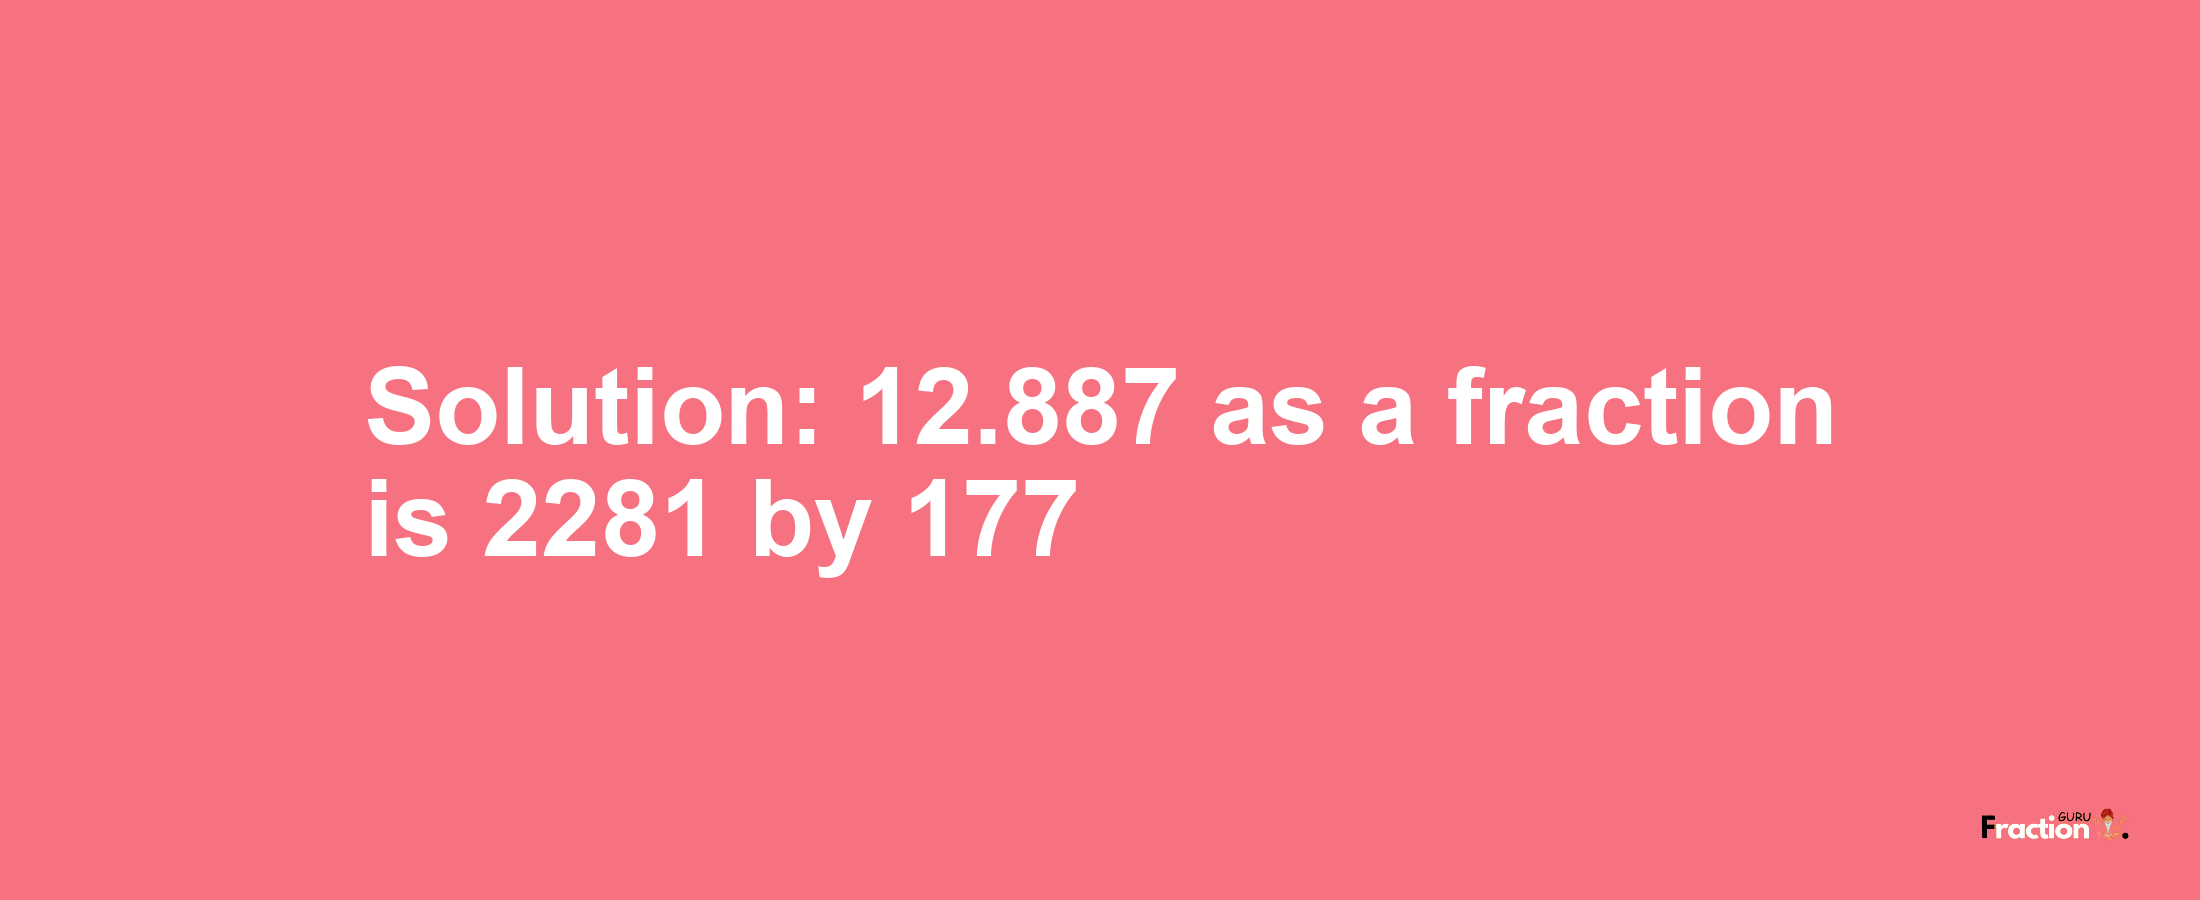 Solution:12.887 as a fraction is 2281/177